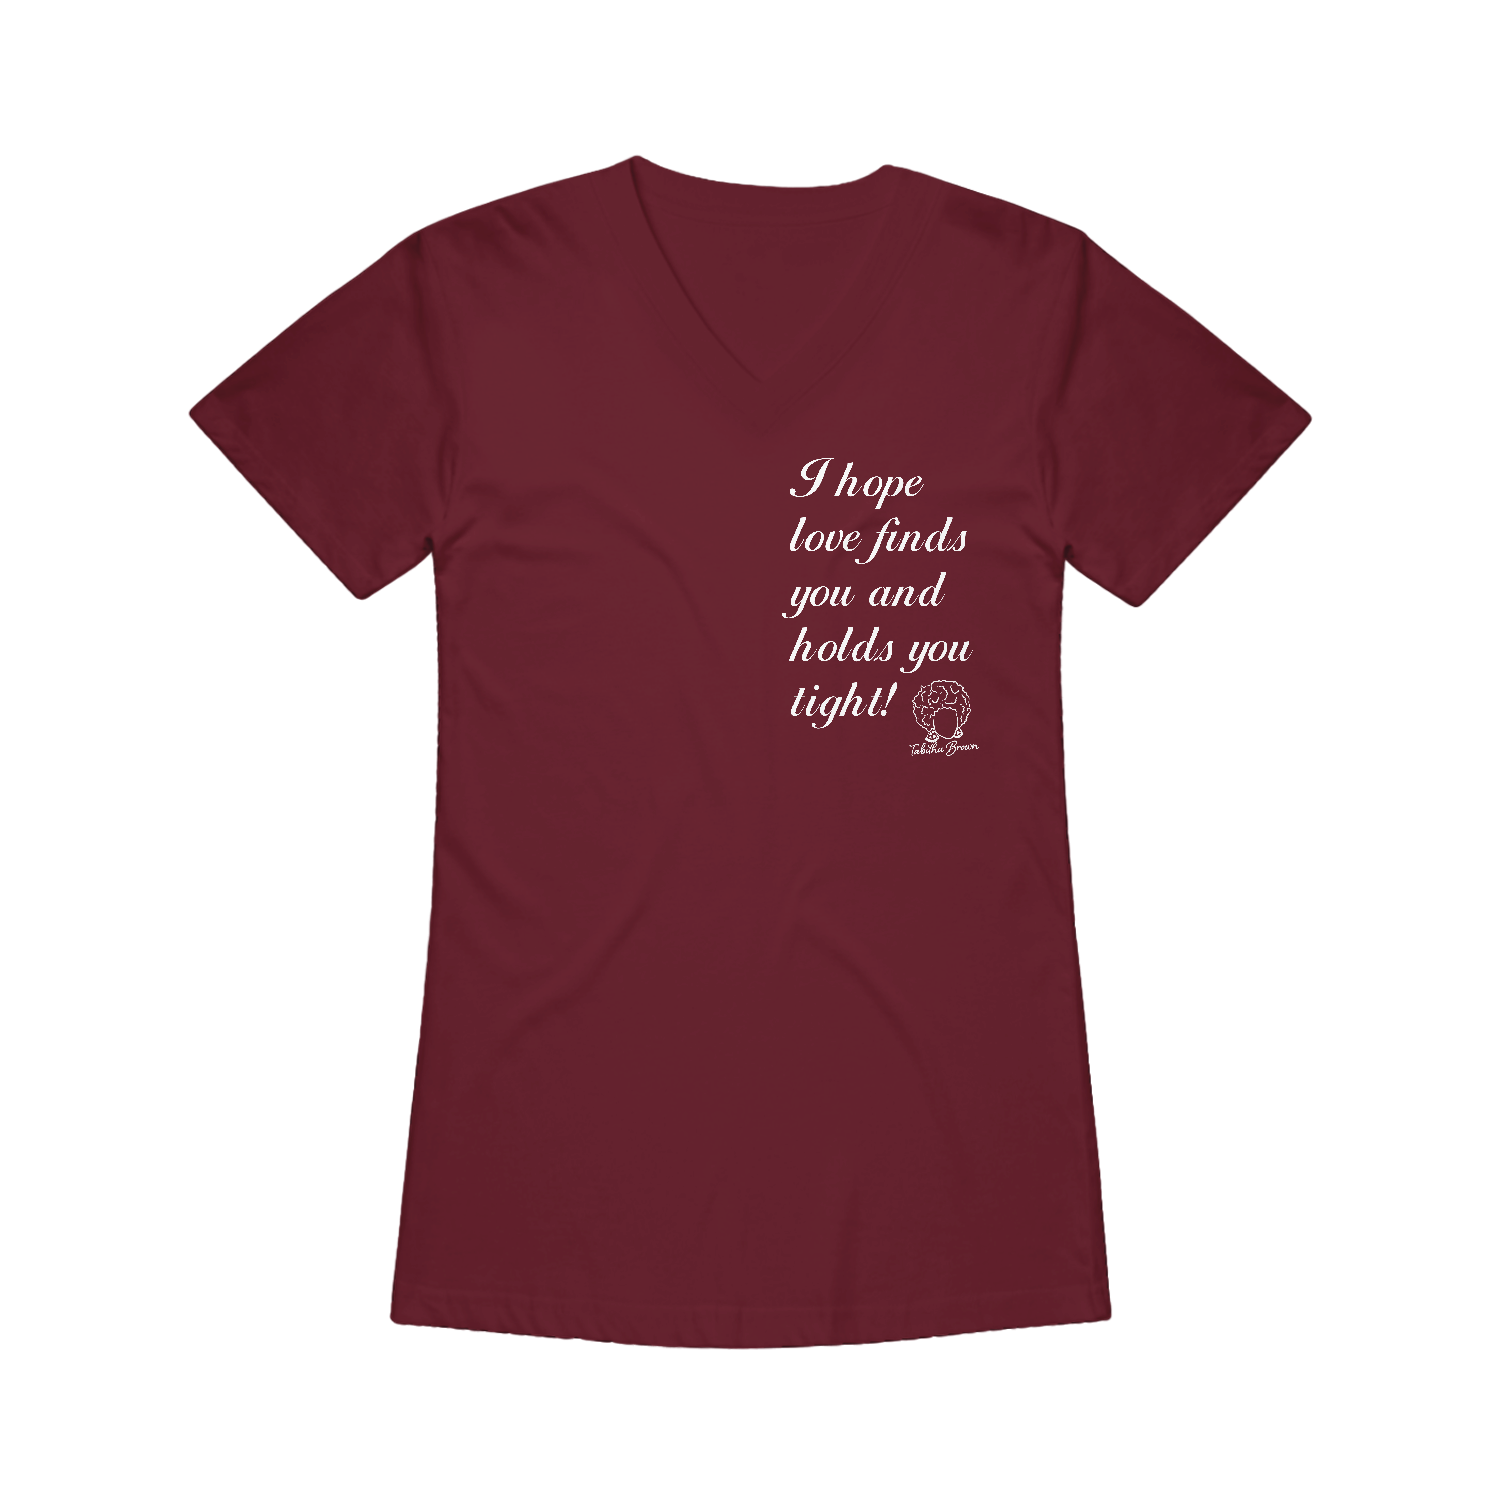 image of maroon ladies v neck tee shirt on clear background. front right chest reads in stacked white 